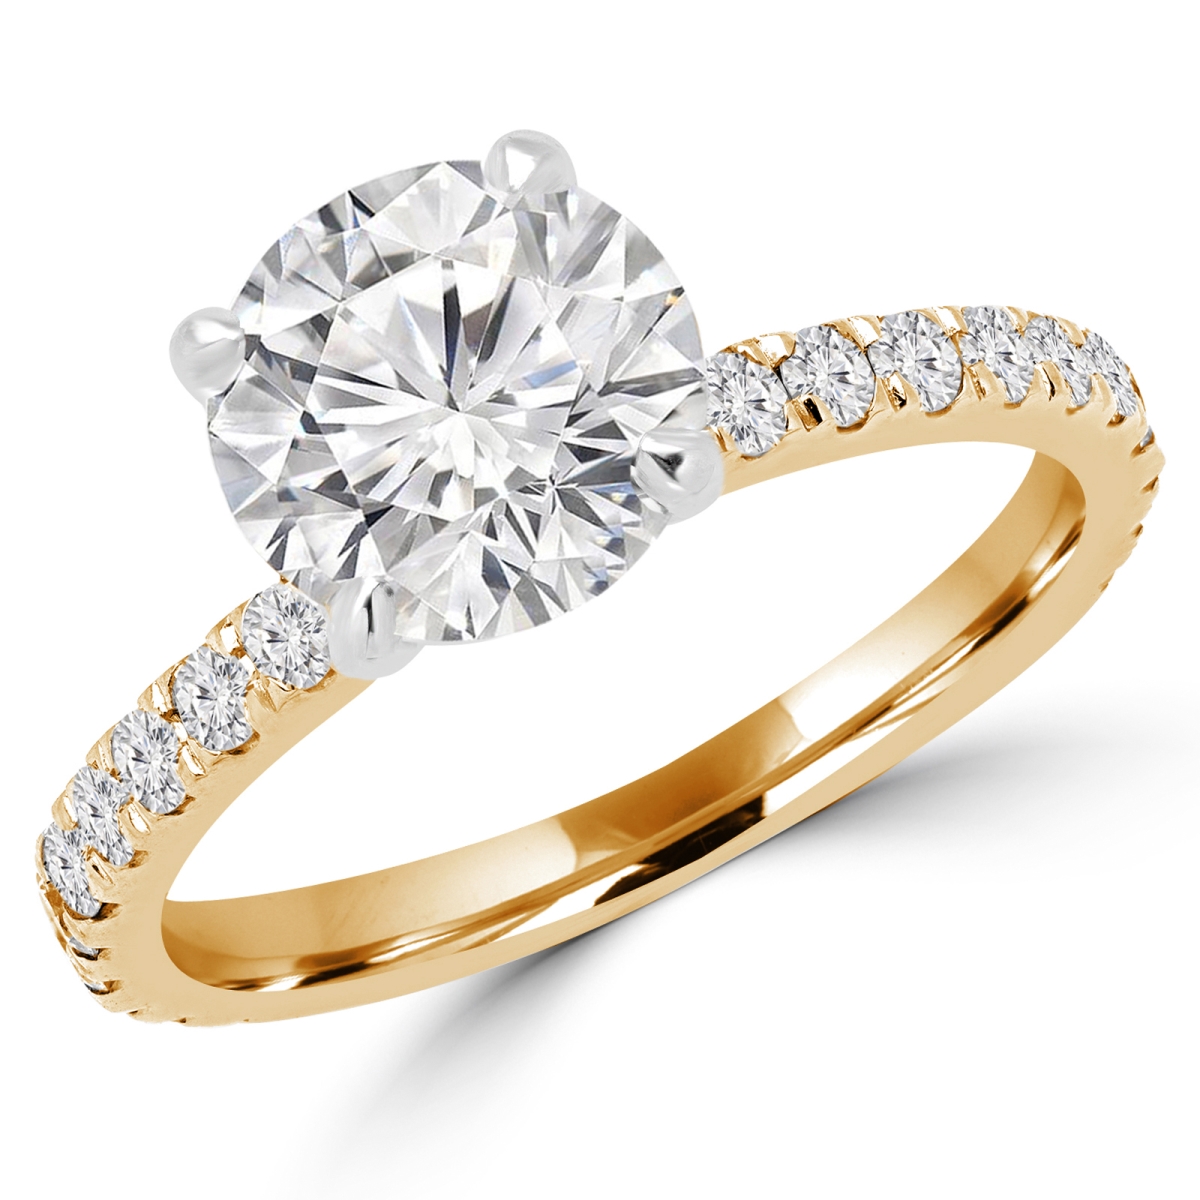 Picture of Majesty Diamonds MD160340-4 1 CTW Round Cut Diamond Multi Stone Engagement Ring in 14K Yellow Gold - Size 4